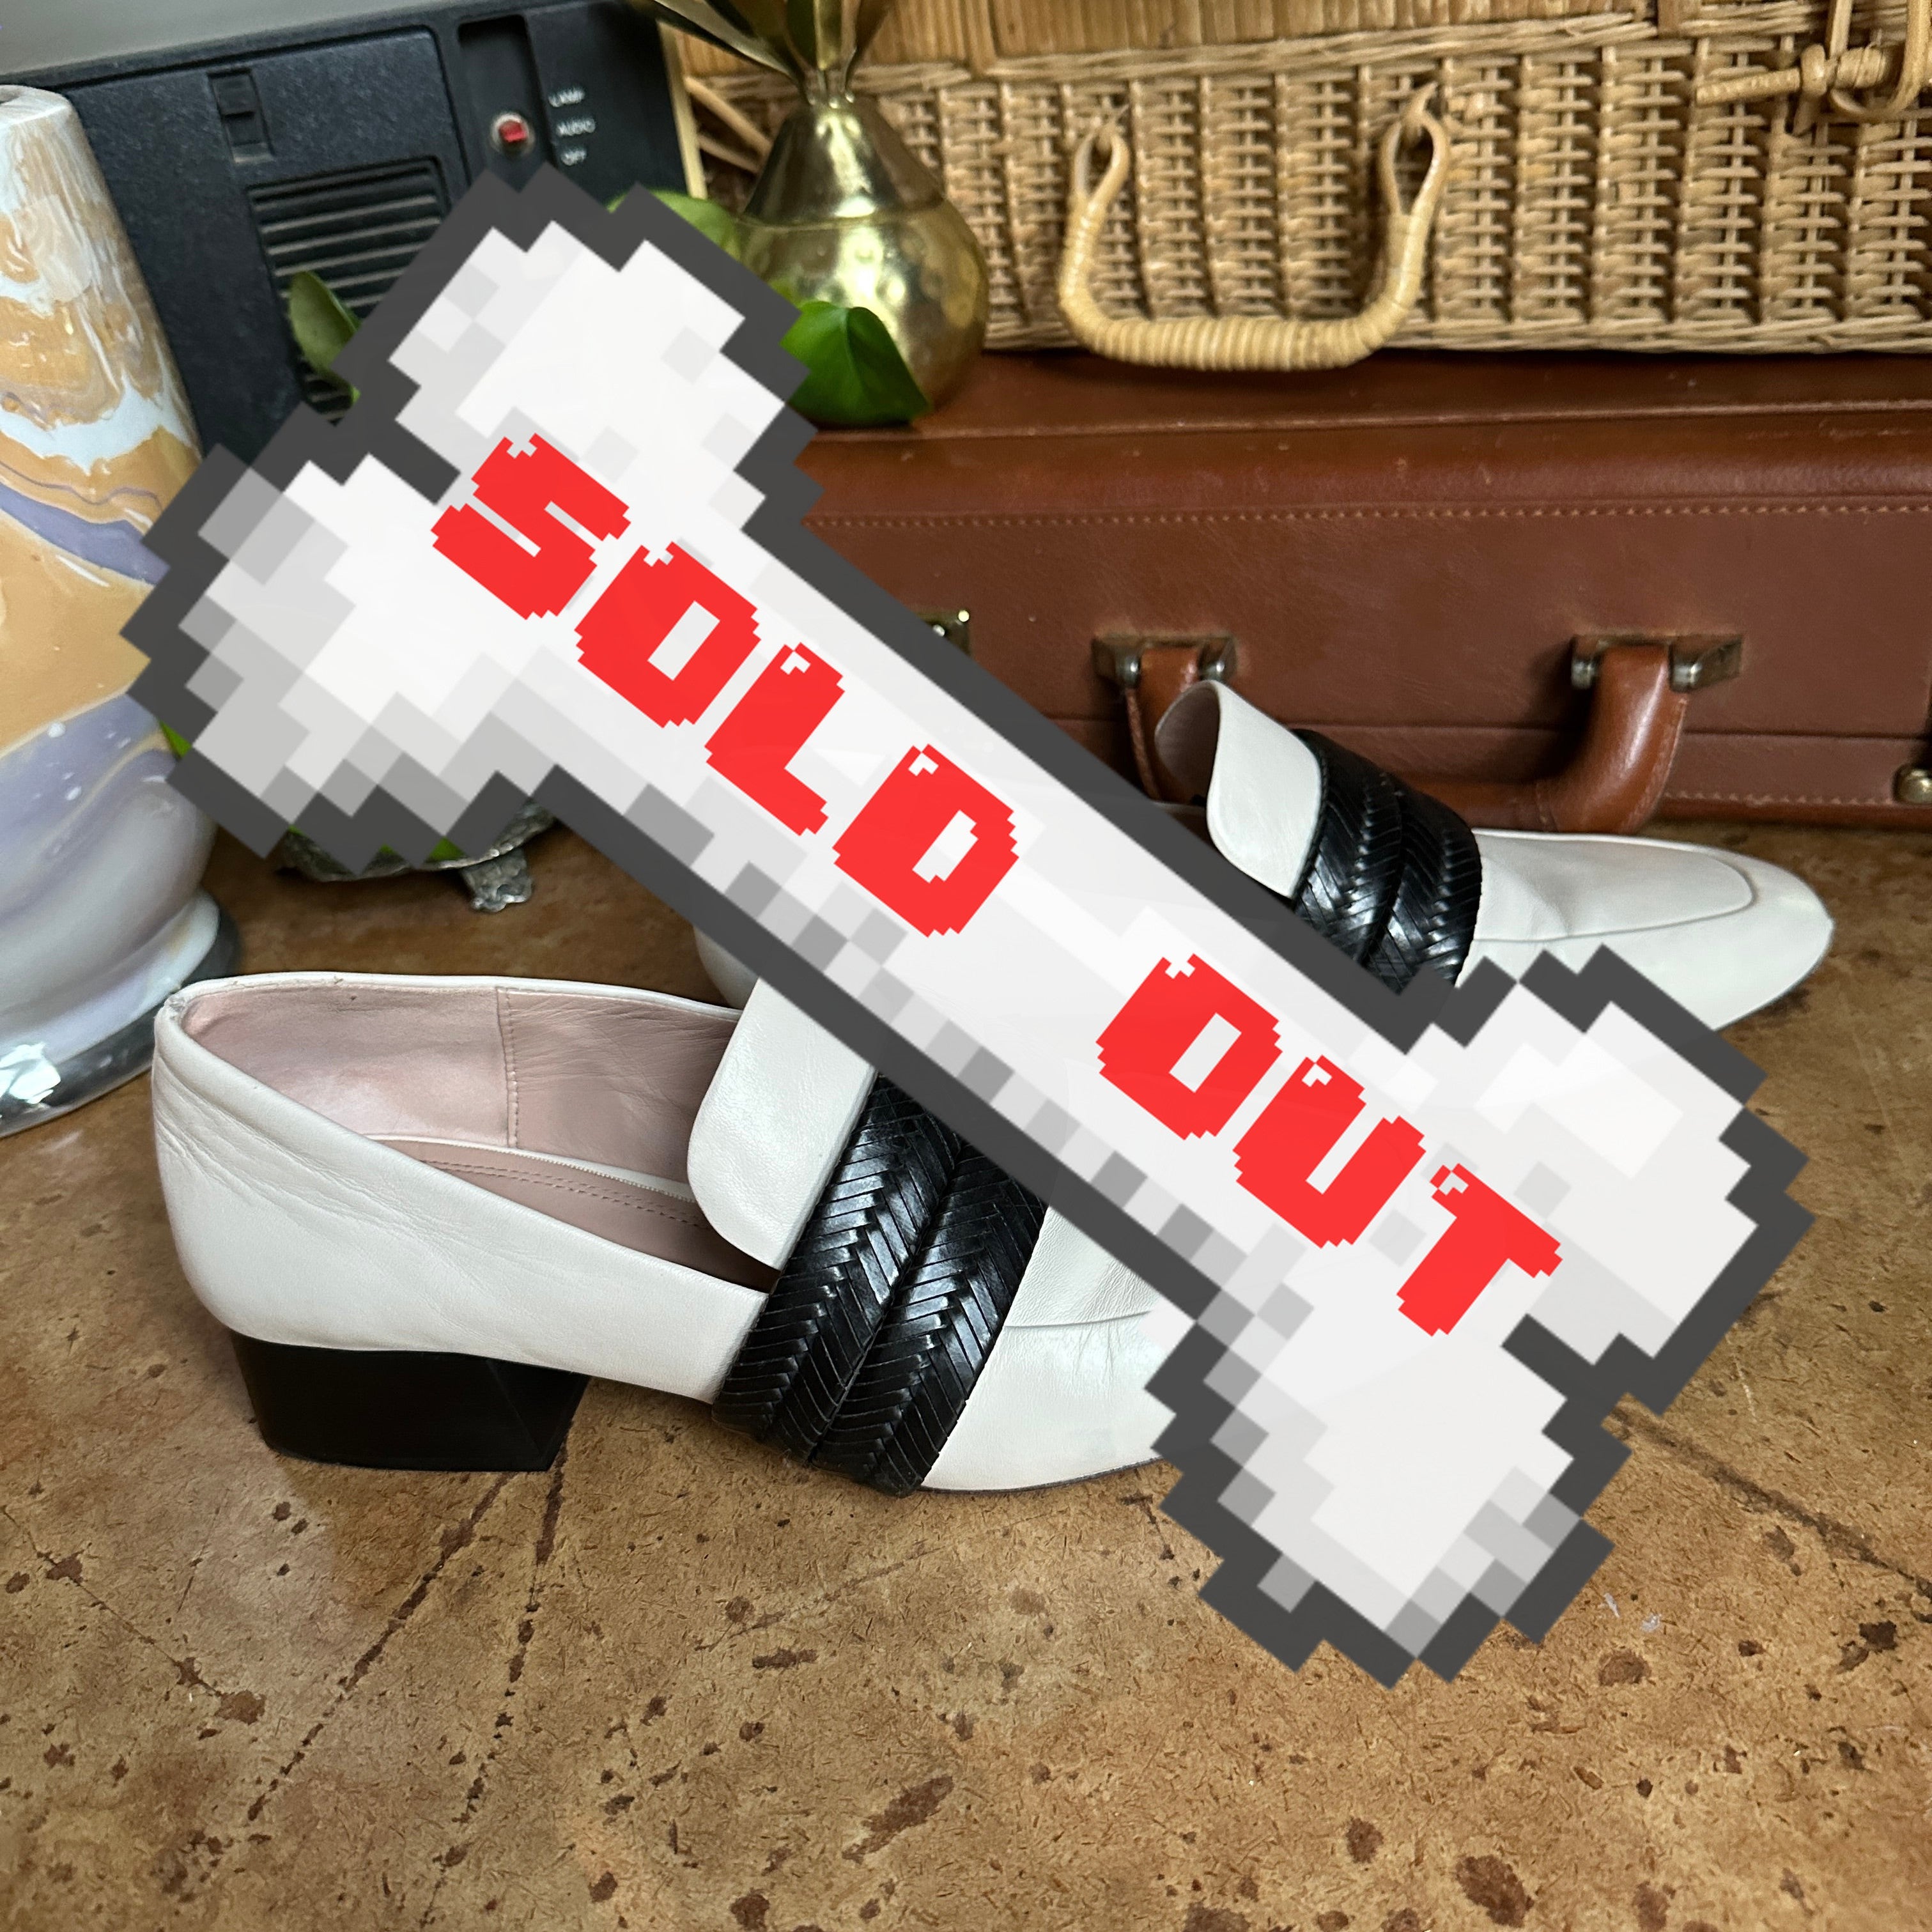 2000s White/Cream Leather Women’s “A.D. & Daughters” Loafers